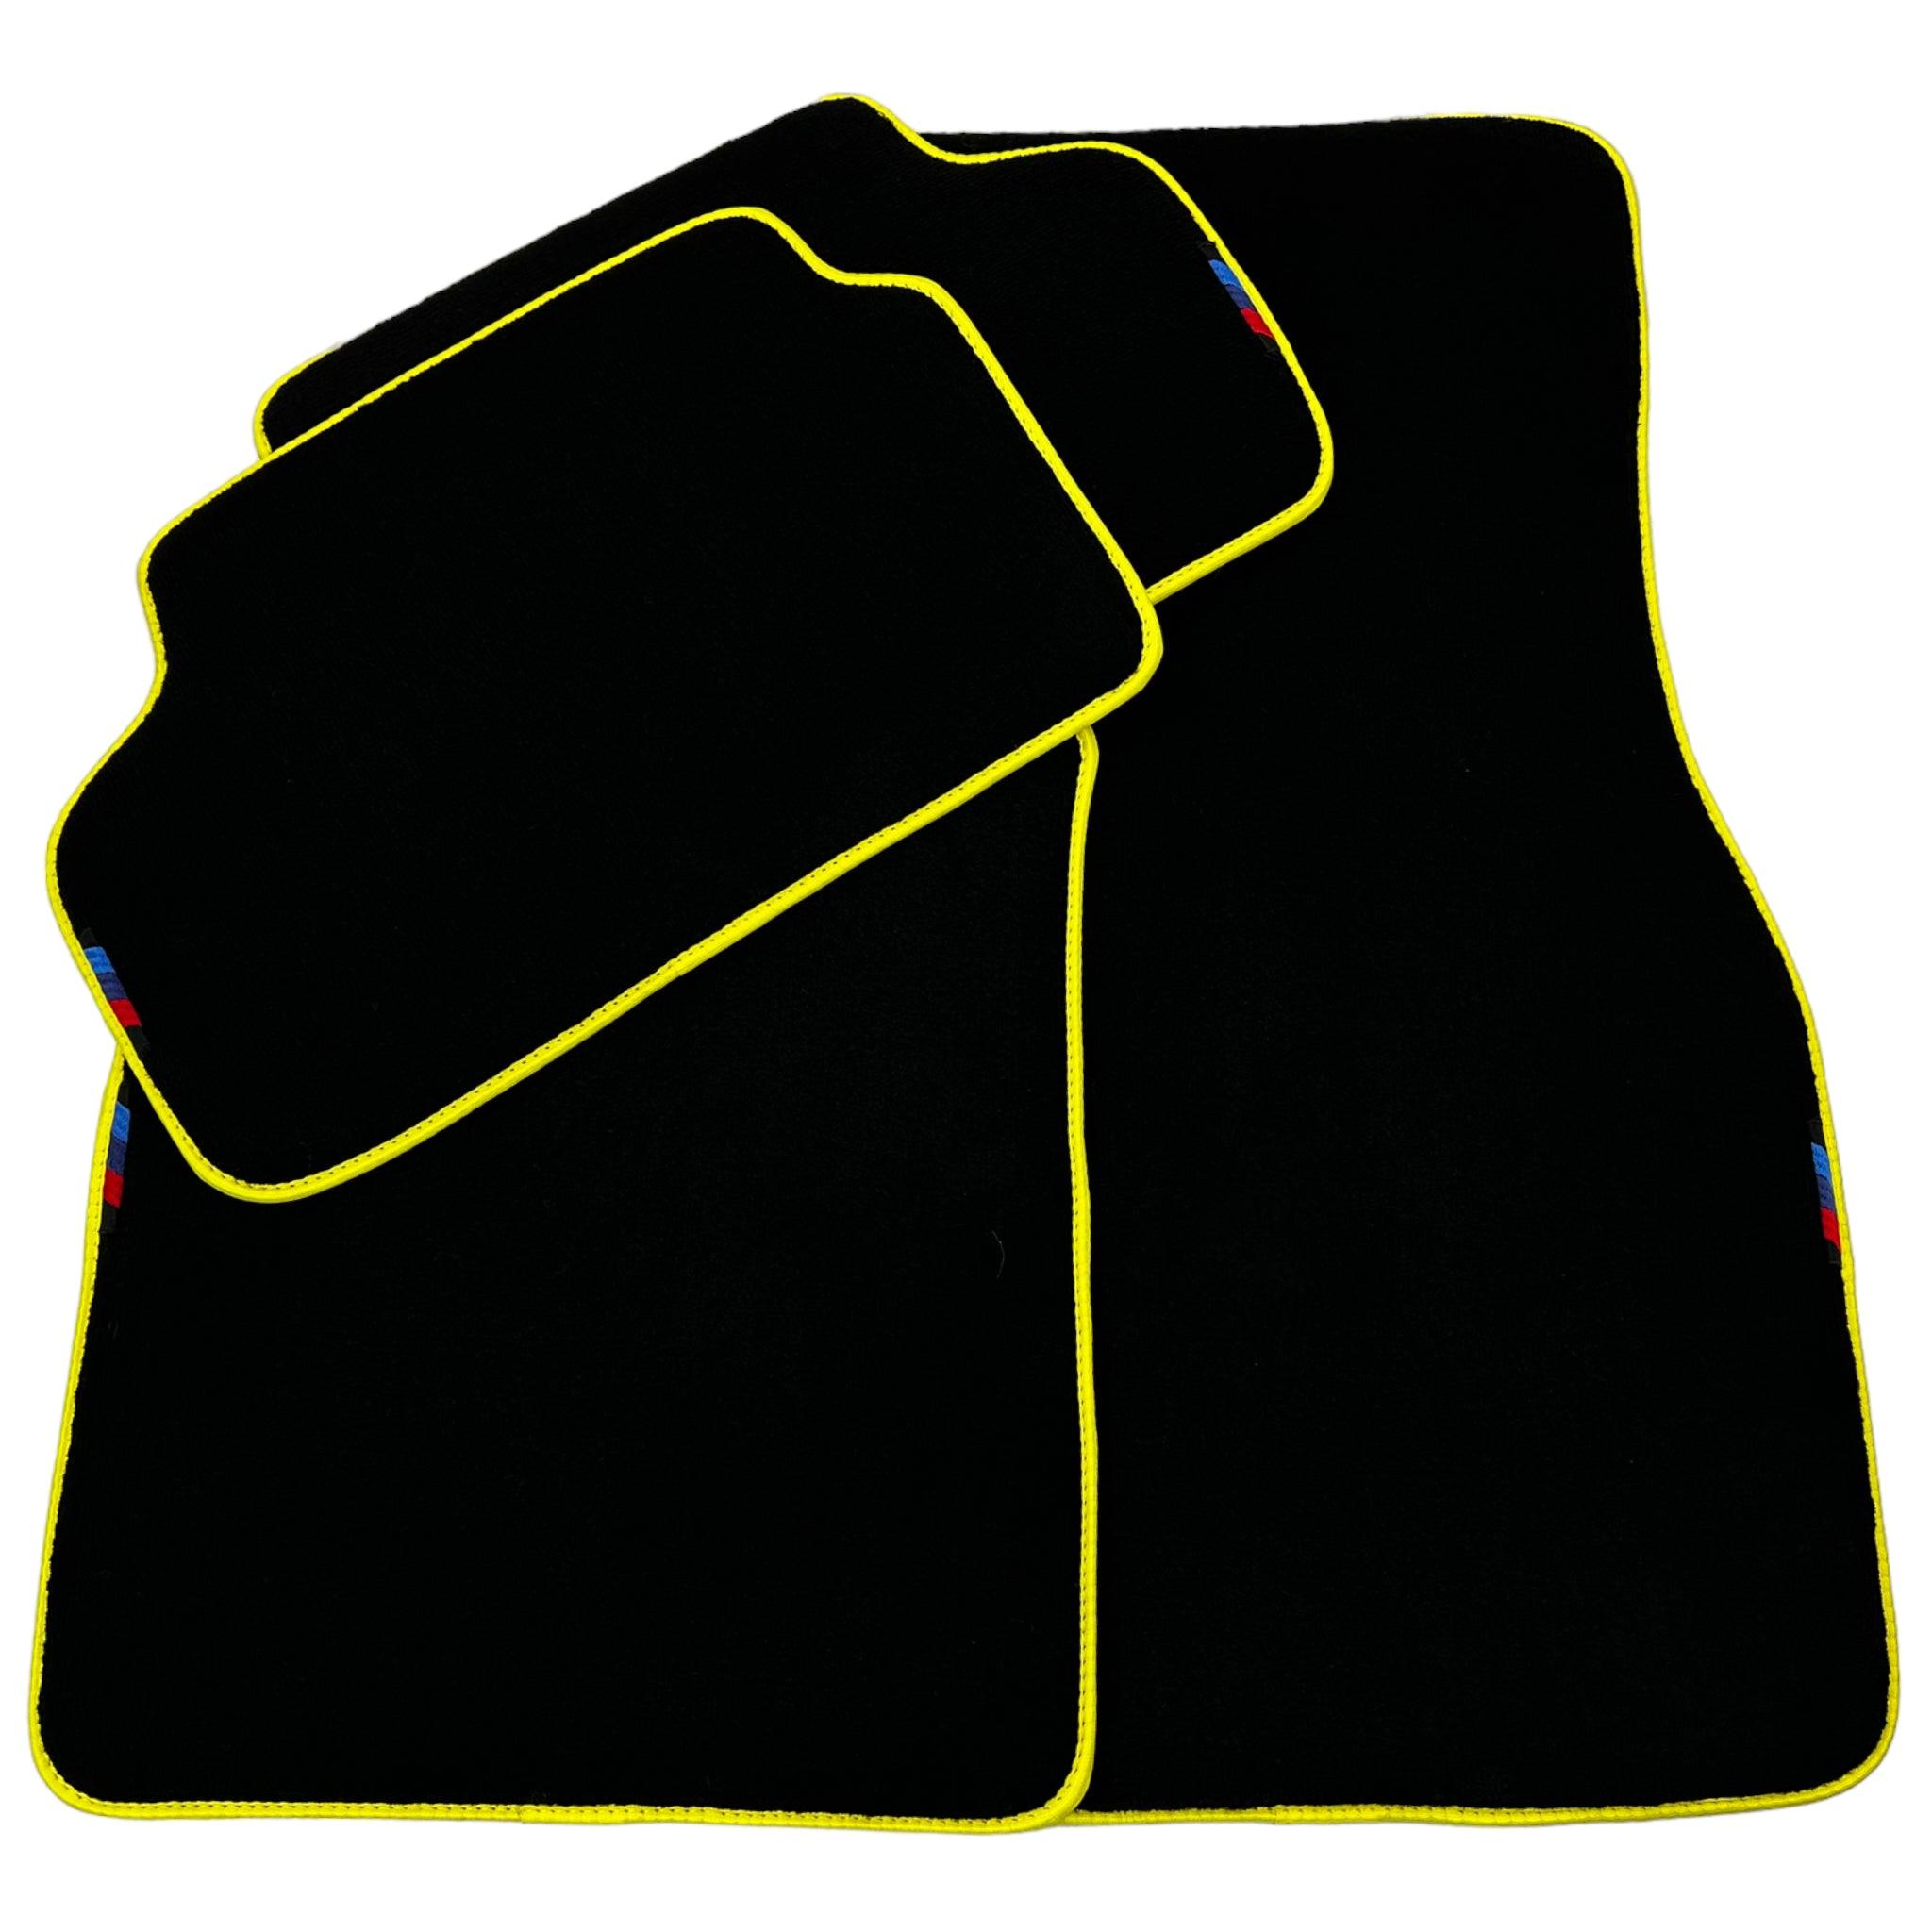 Black Floor Mats For BMW 3 Series E36 Convertible | Fighter Jet Edition | Yellow Trim